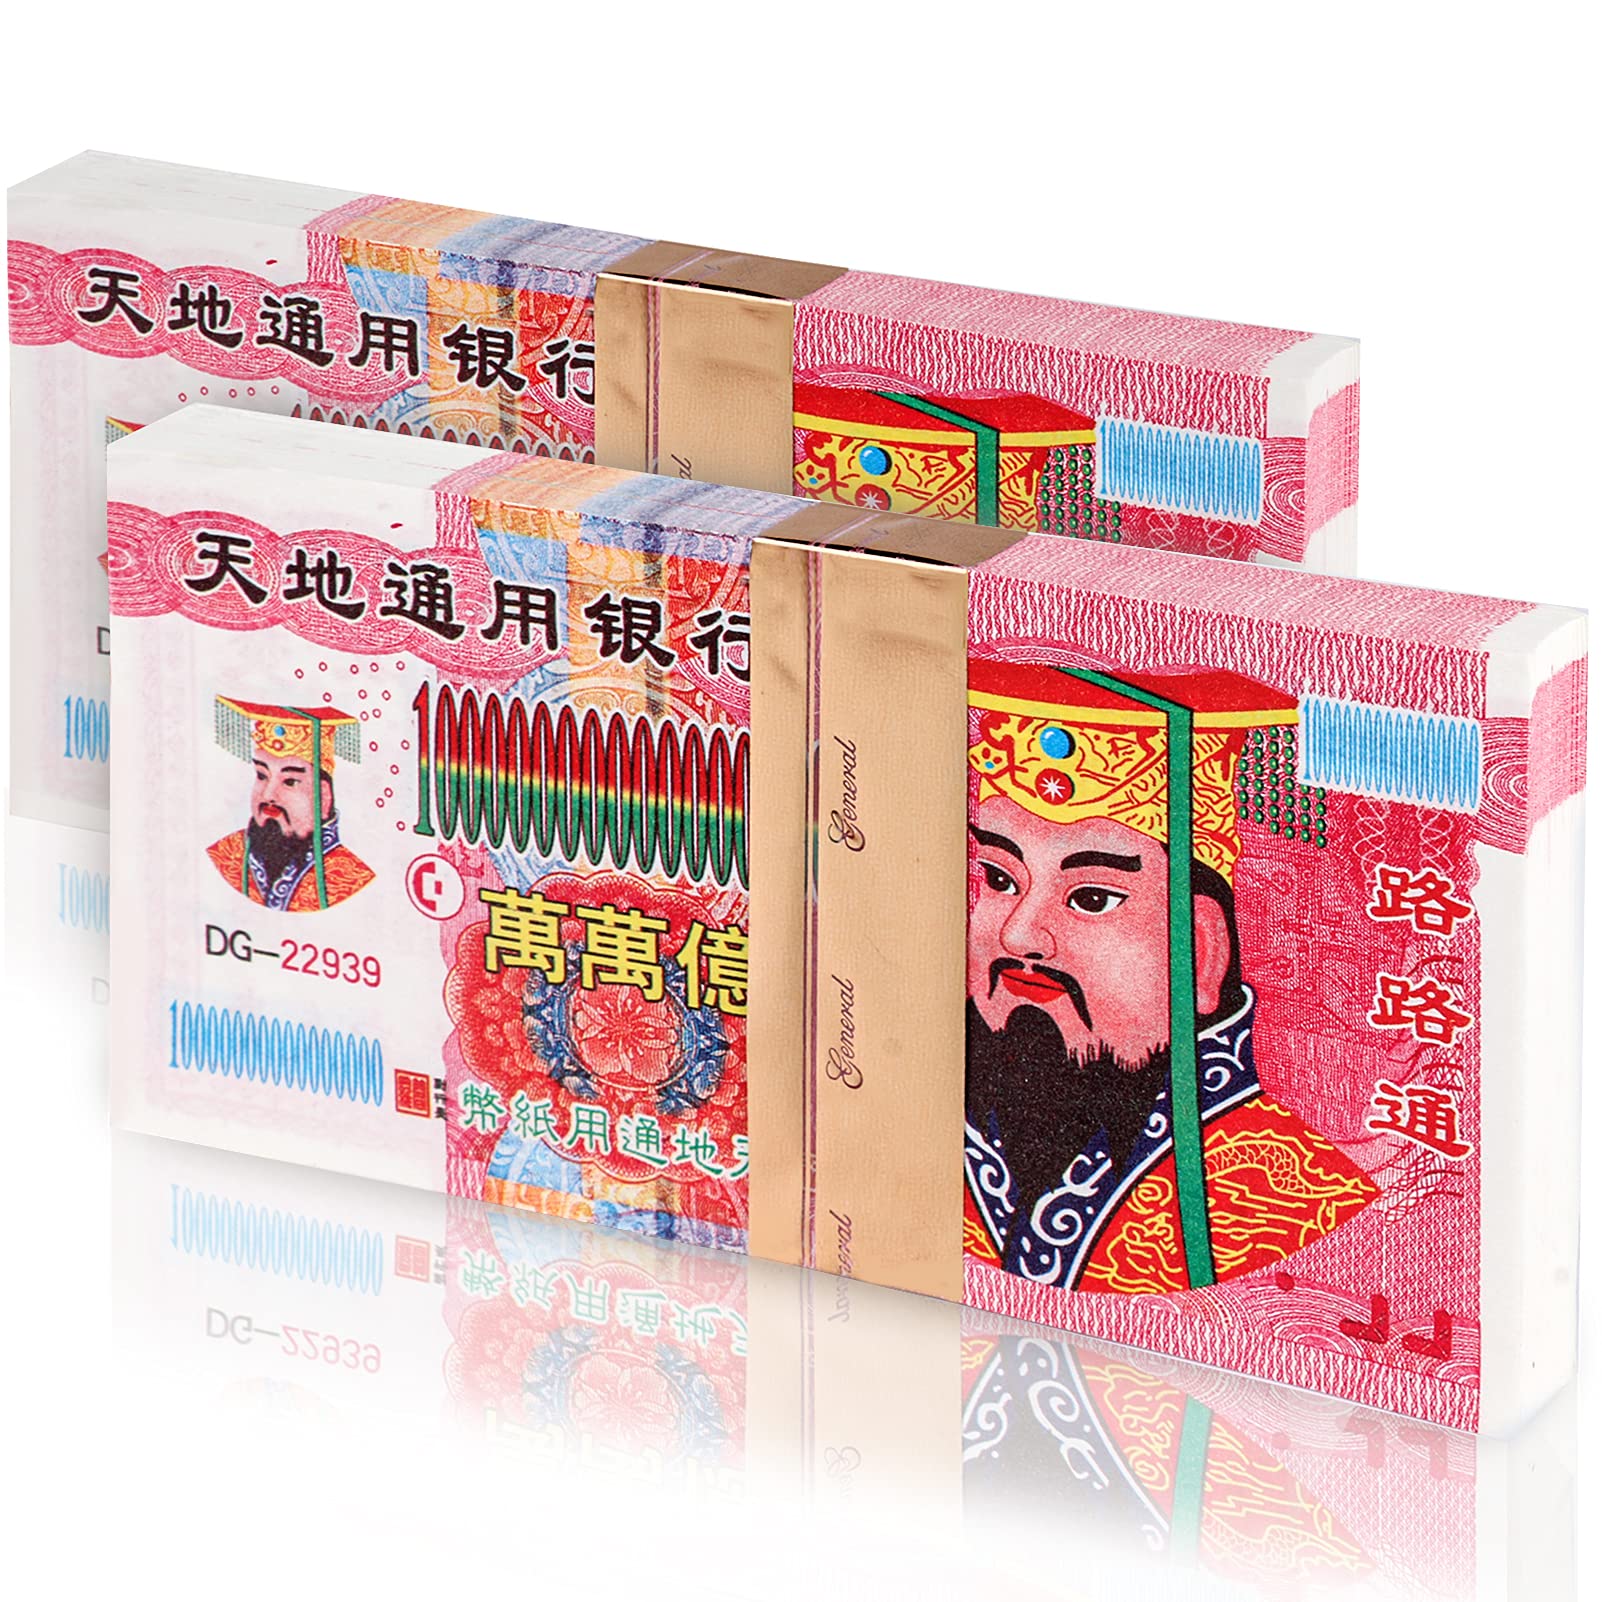 Ancestor Money, 200 Piece Chinese Joss Paper Money, Heaven Bank Notes for  Funerals, Worshiping Ancestor, Come Into A Good Fortune